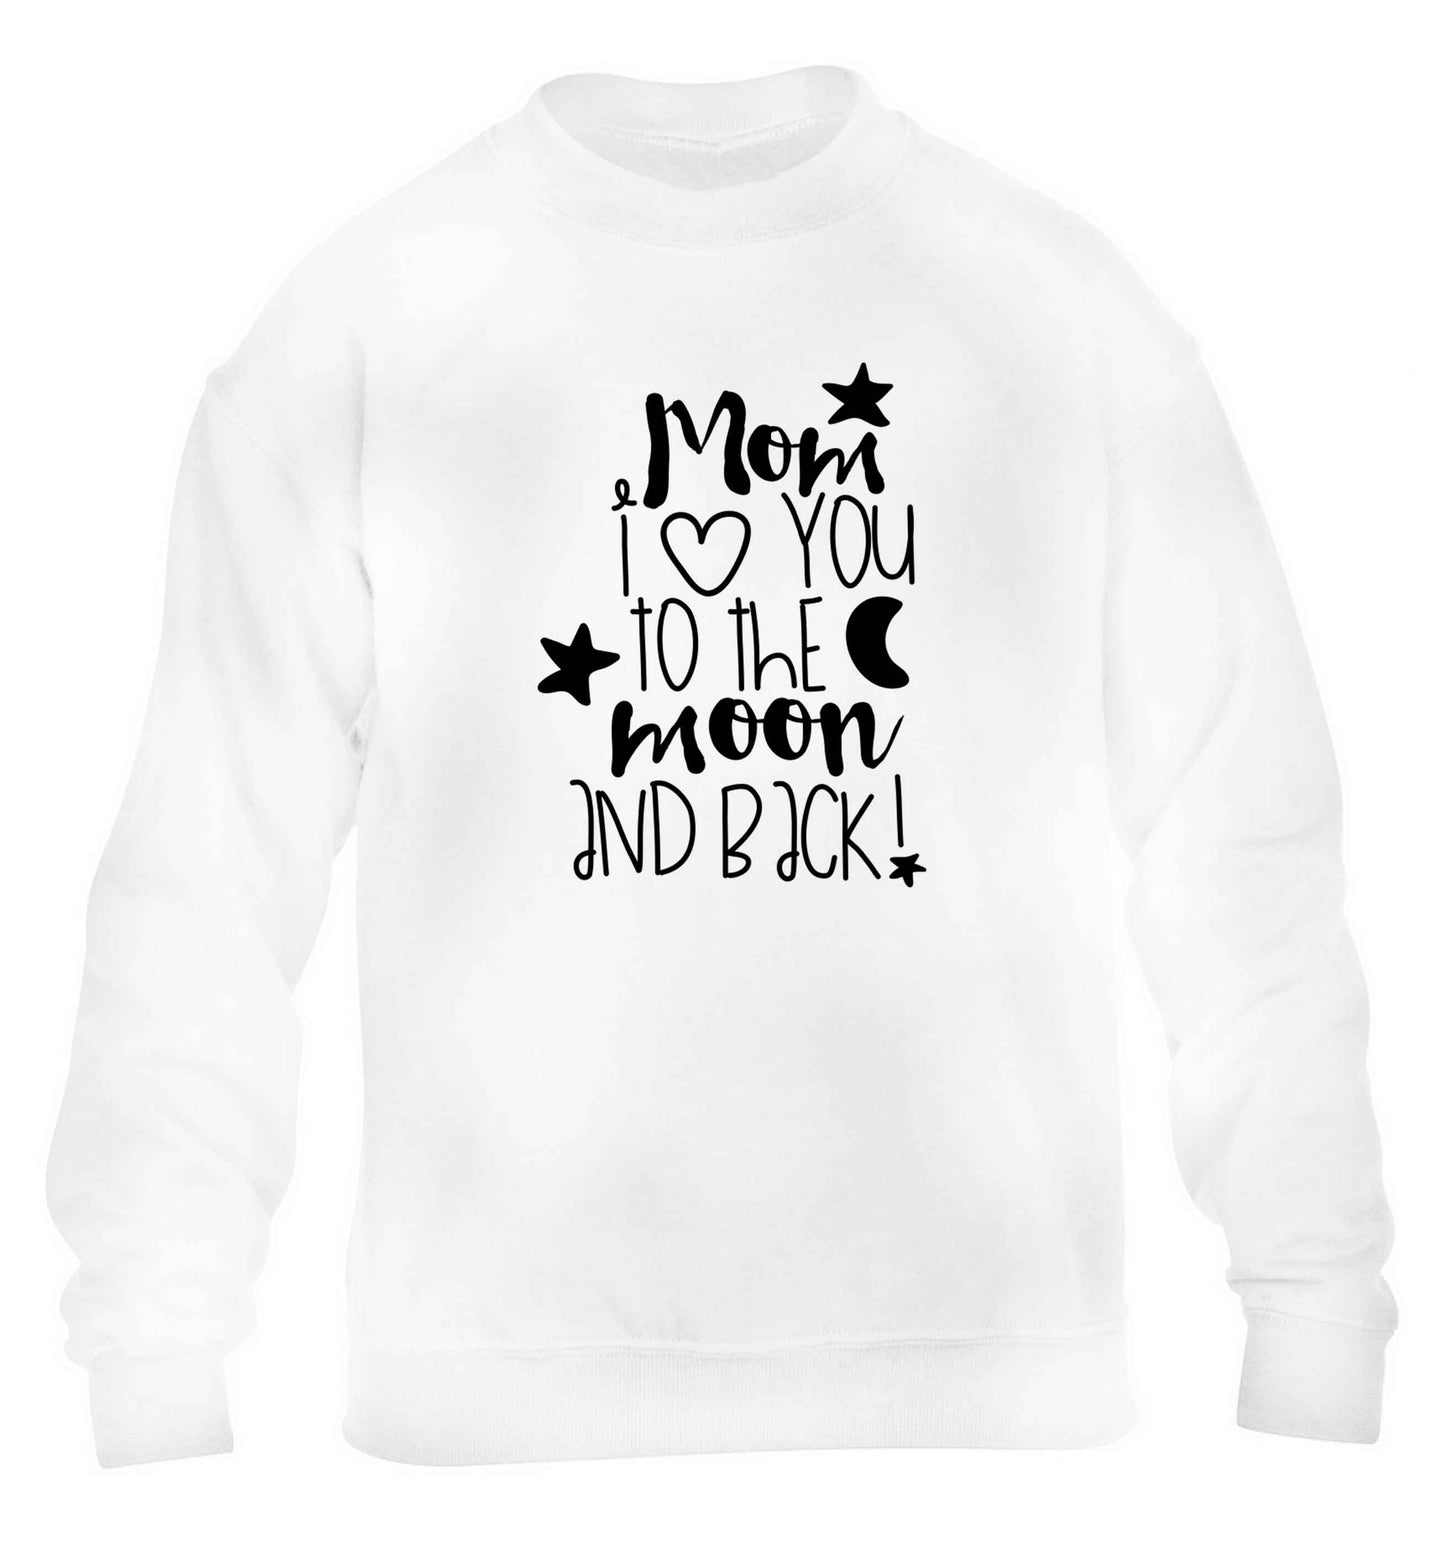 Mom I love you to the moon and back children's white sweater 12-13 Years